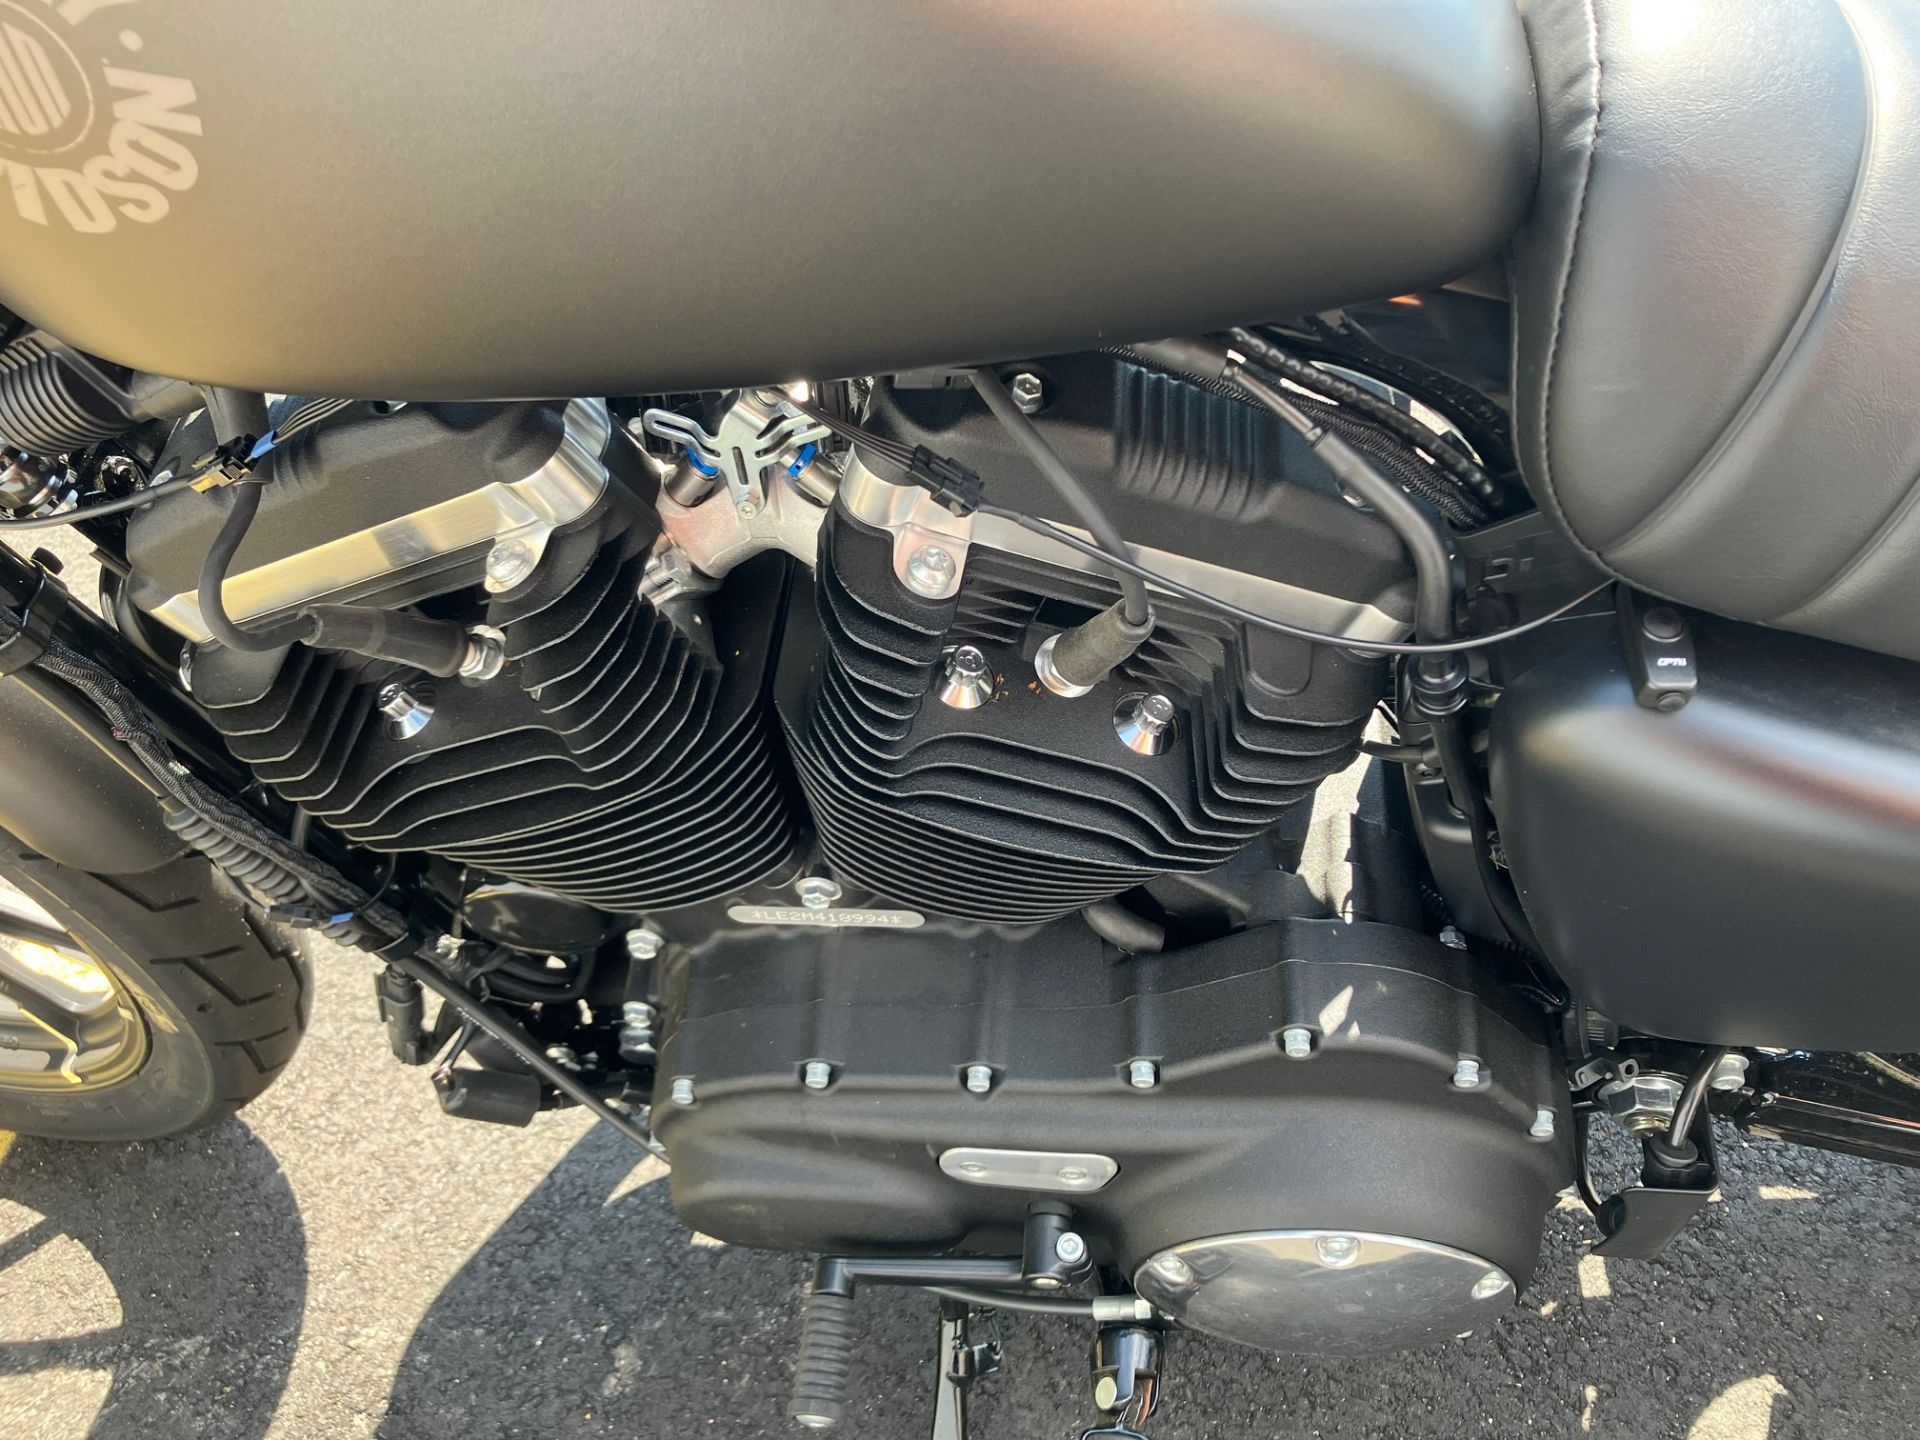 2021 Harley-Davidson IRON 883 in West Long Branch, New Jersey - Photo 11